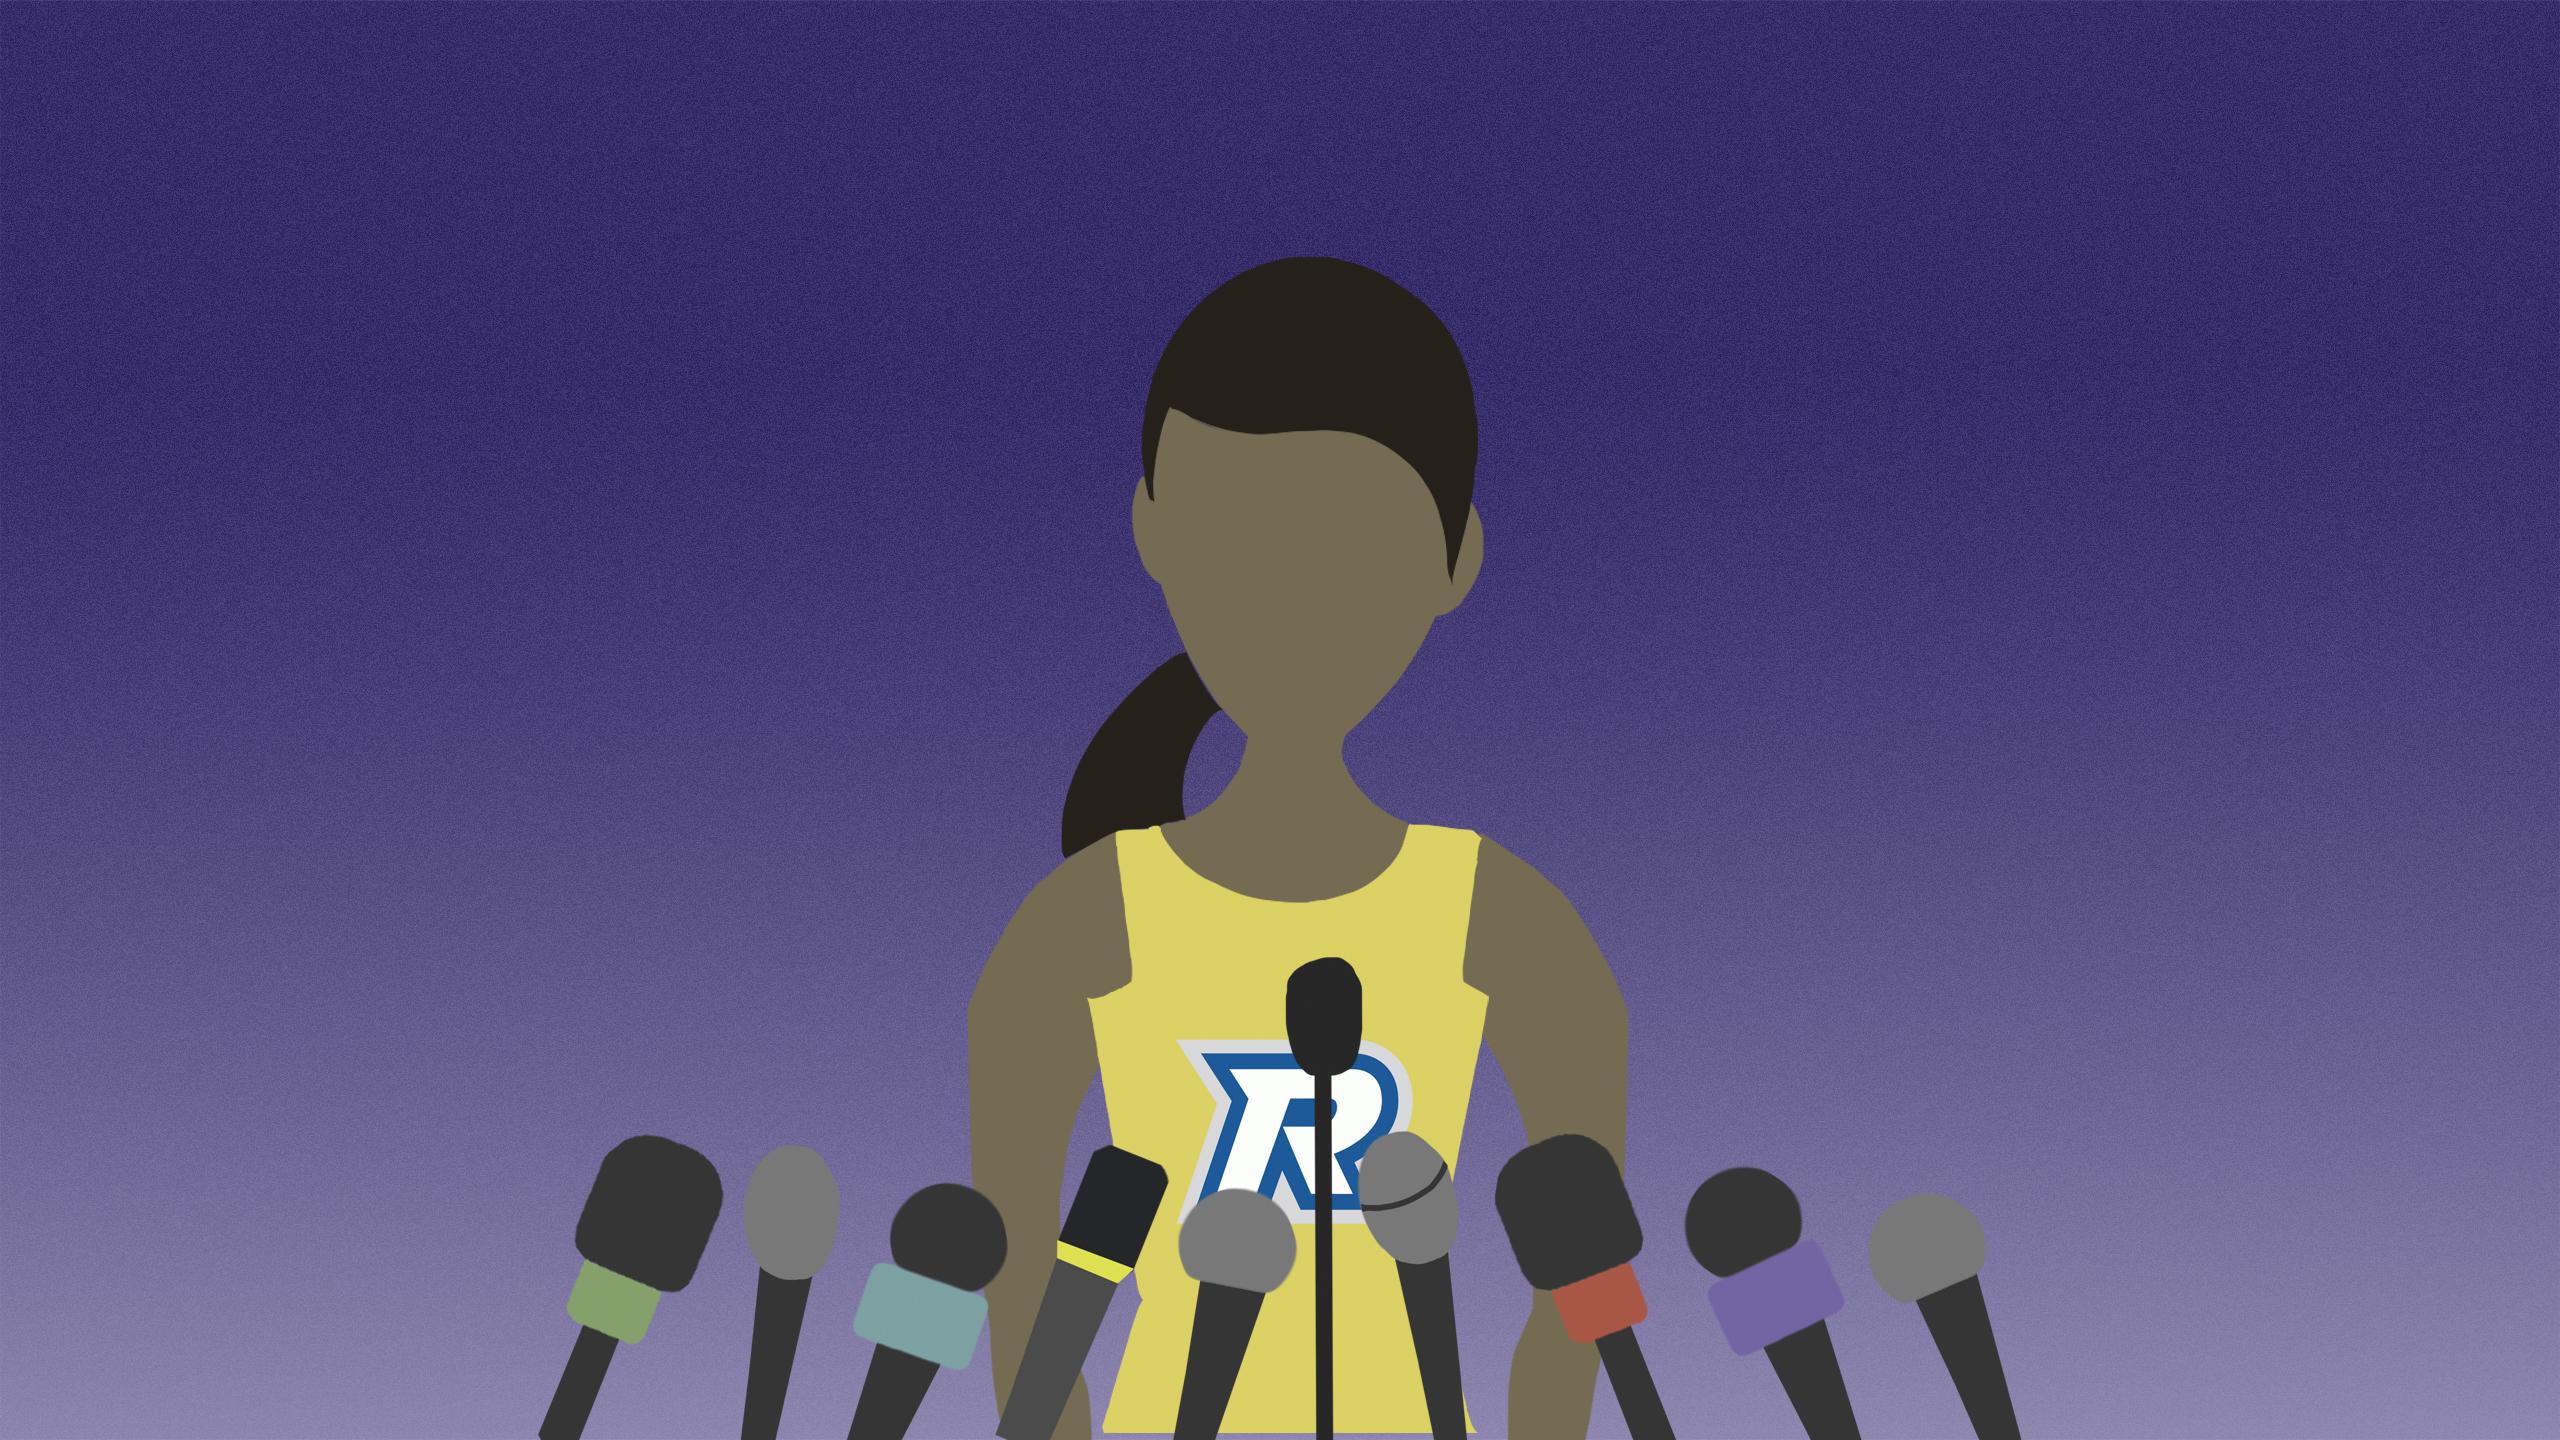 An illustration of a female athlete with several microphones pointed at her